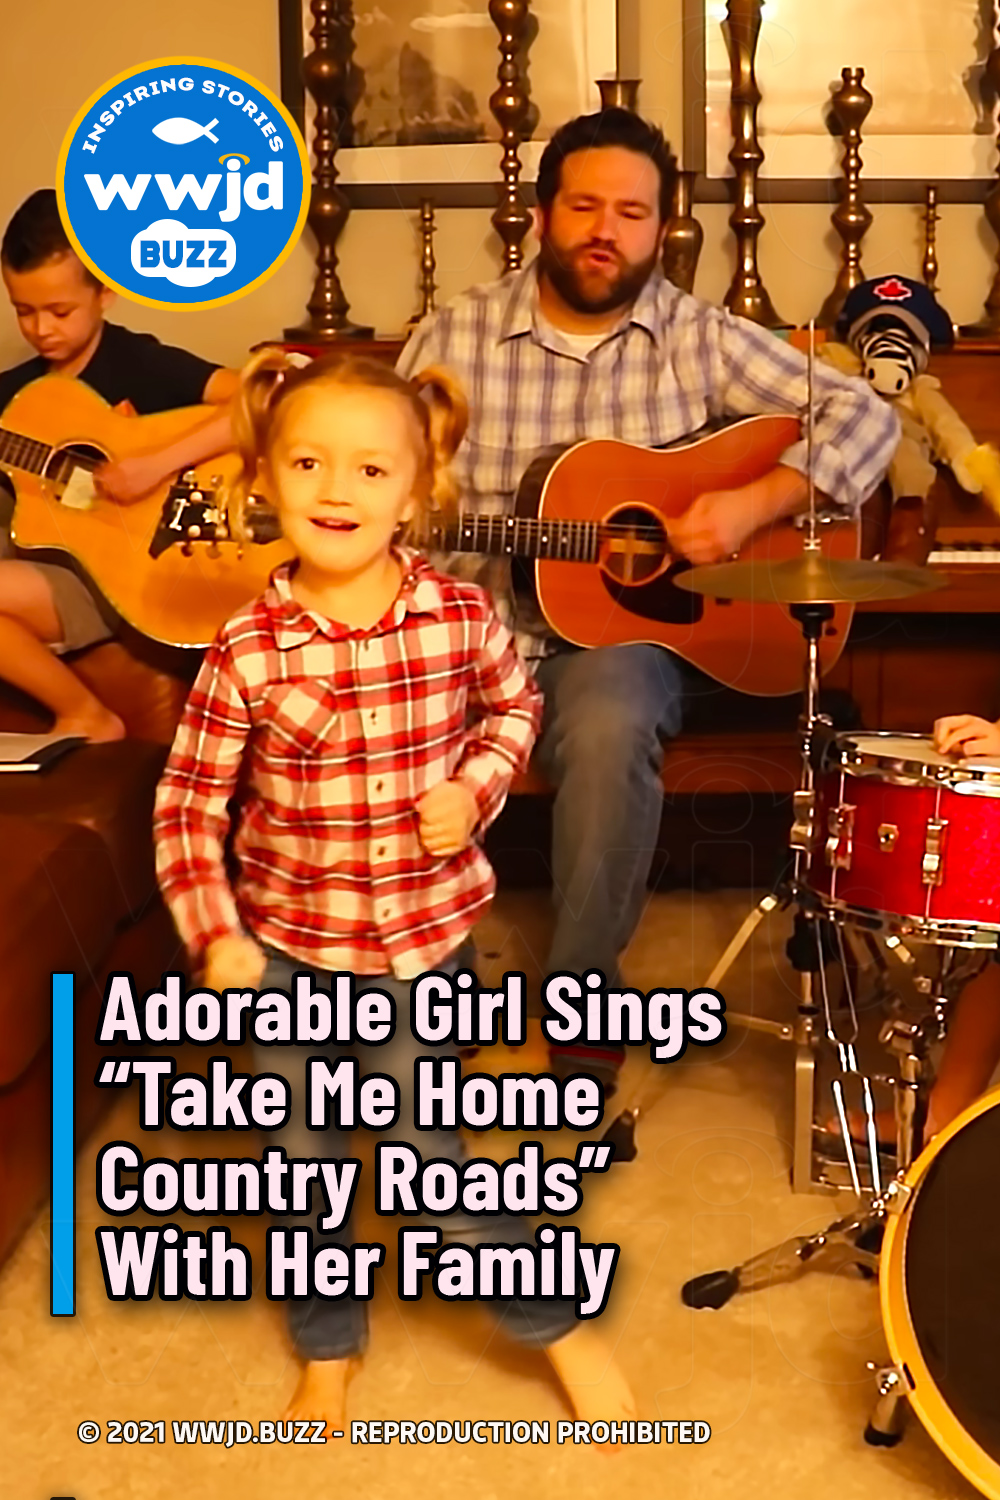 Adorable Girl Sings “Take Me Home Country Roads” With Her Family